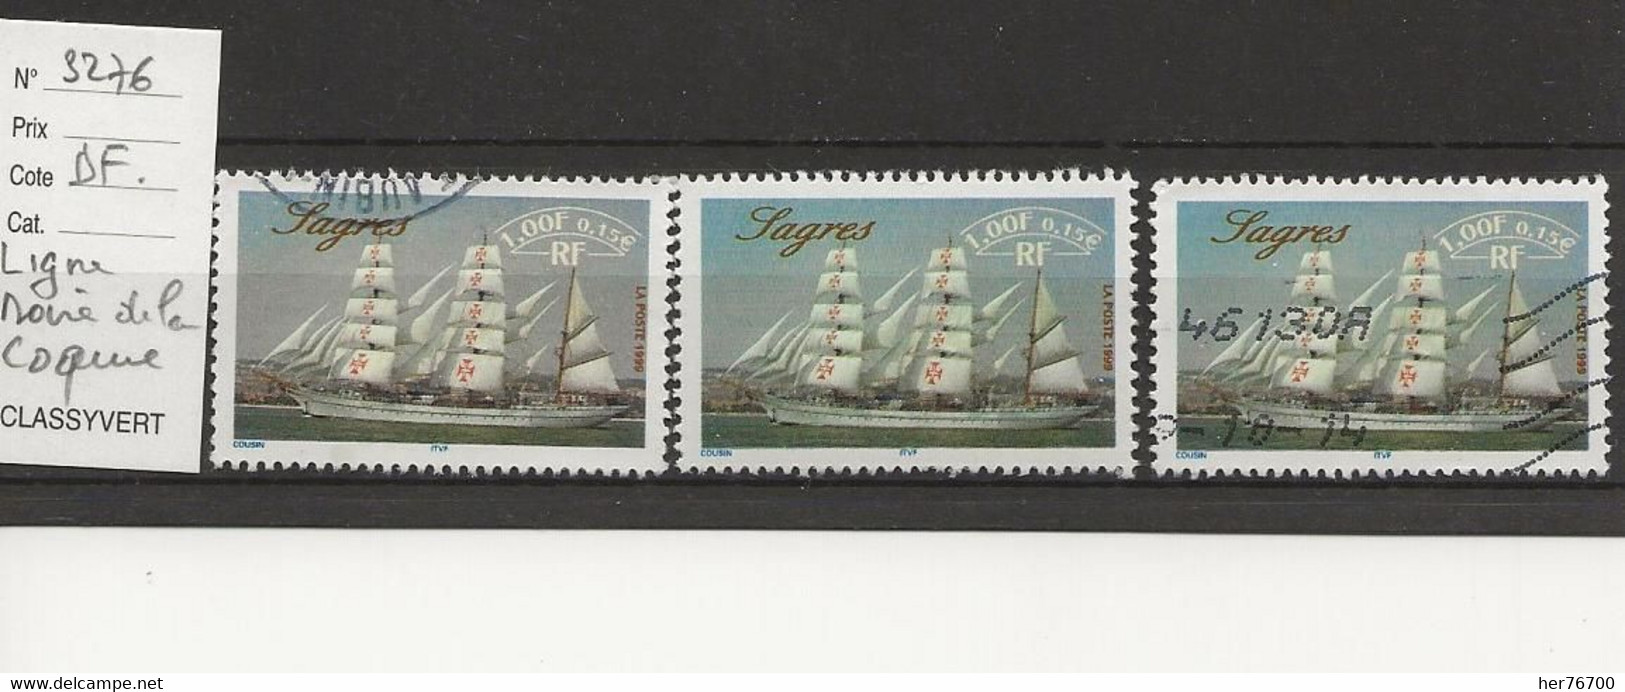 TIMBRE  YVERT N°  3269  3270 3275  3276 - Used Stamps